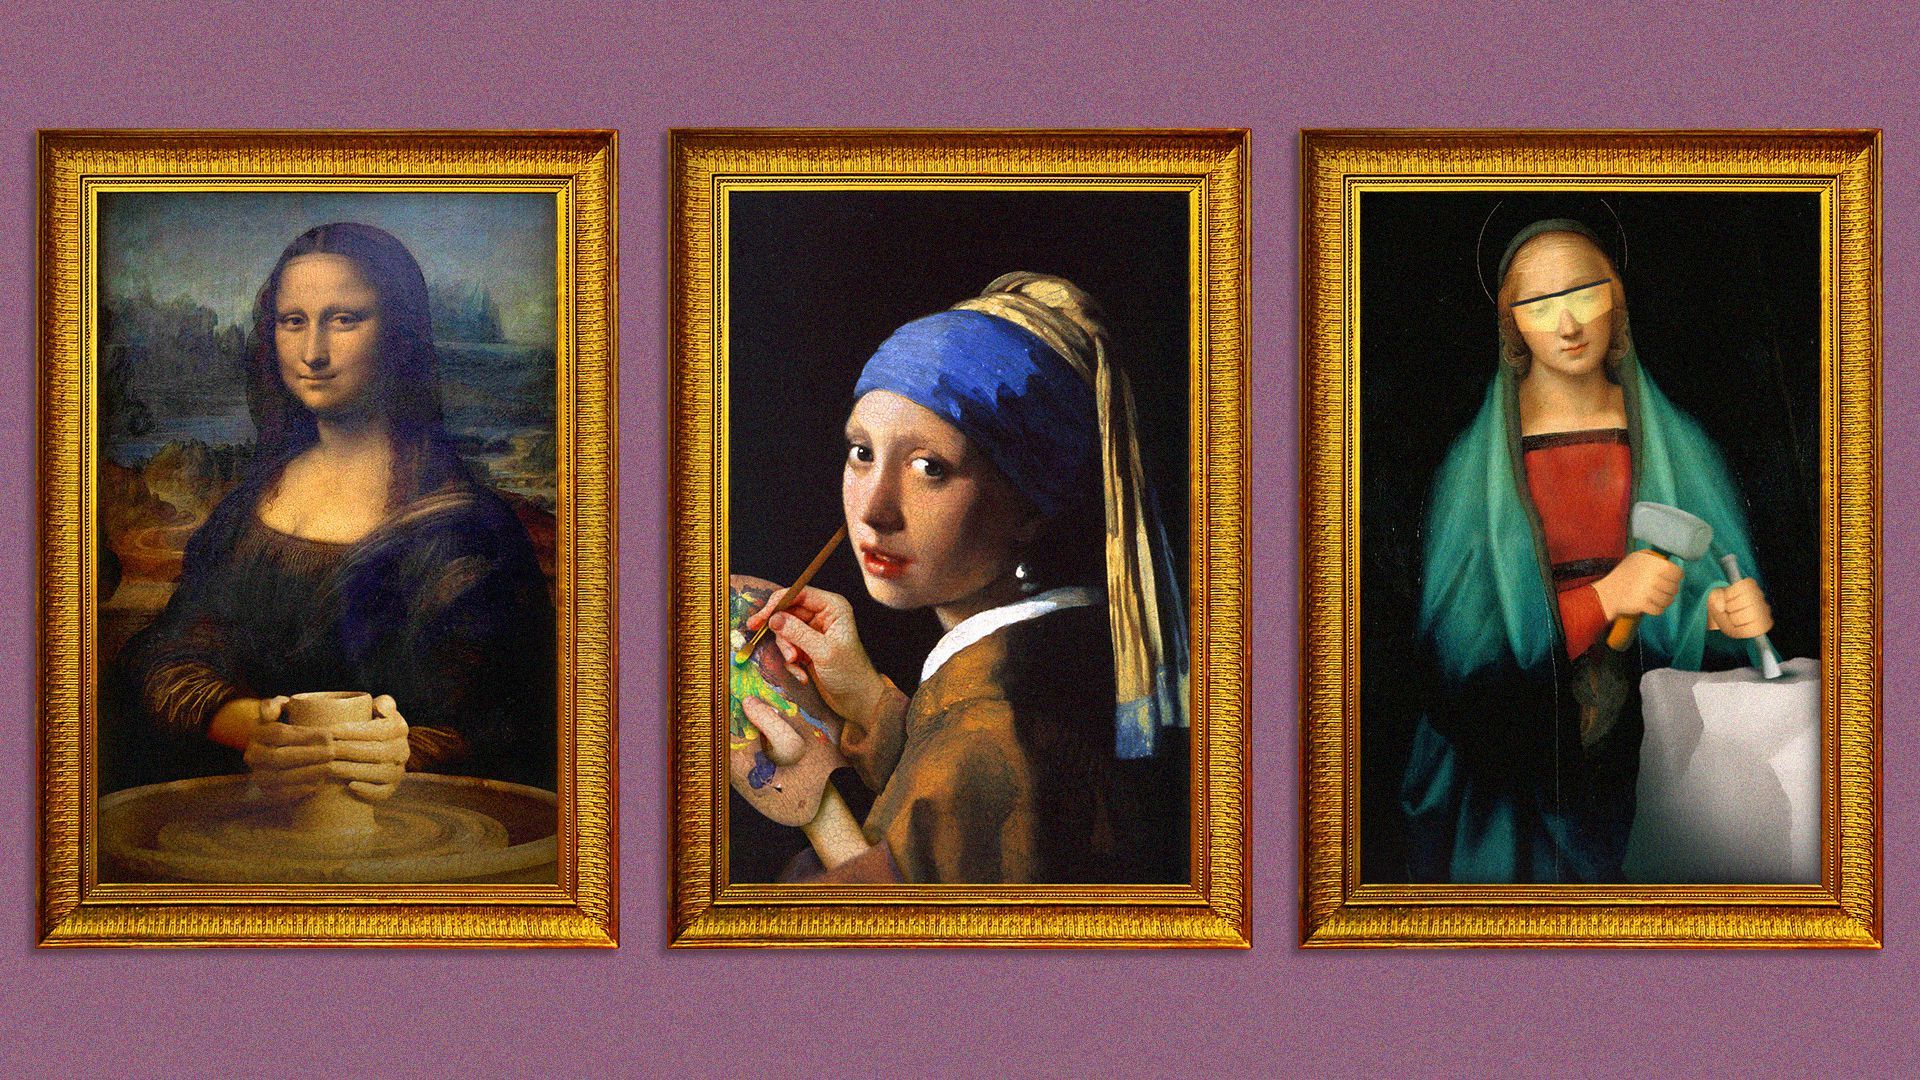 Female Artists That Made History Through the Ages